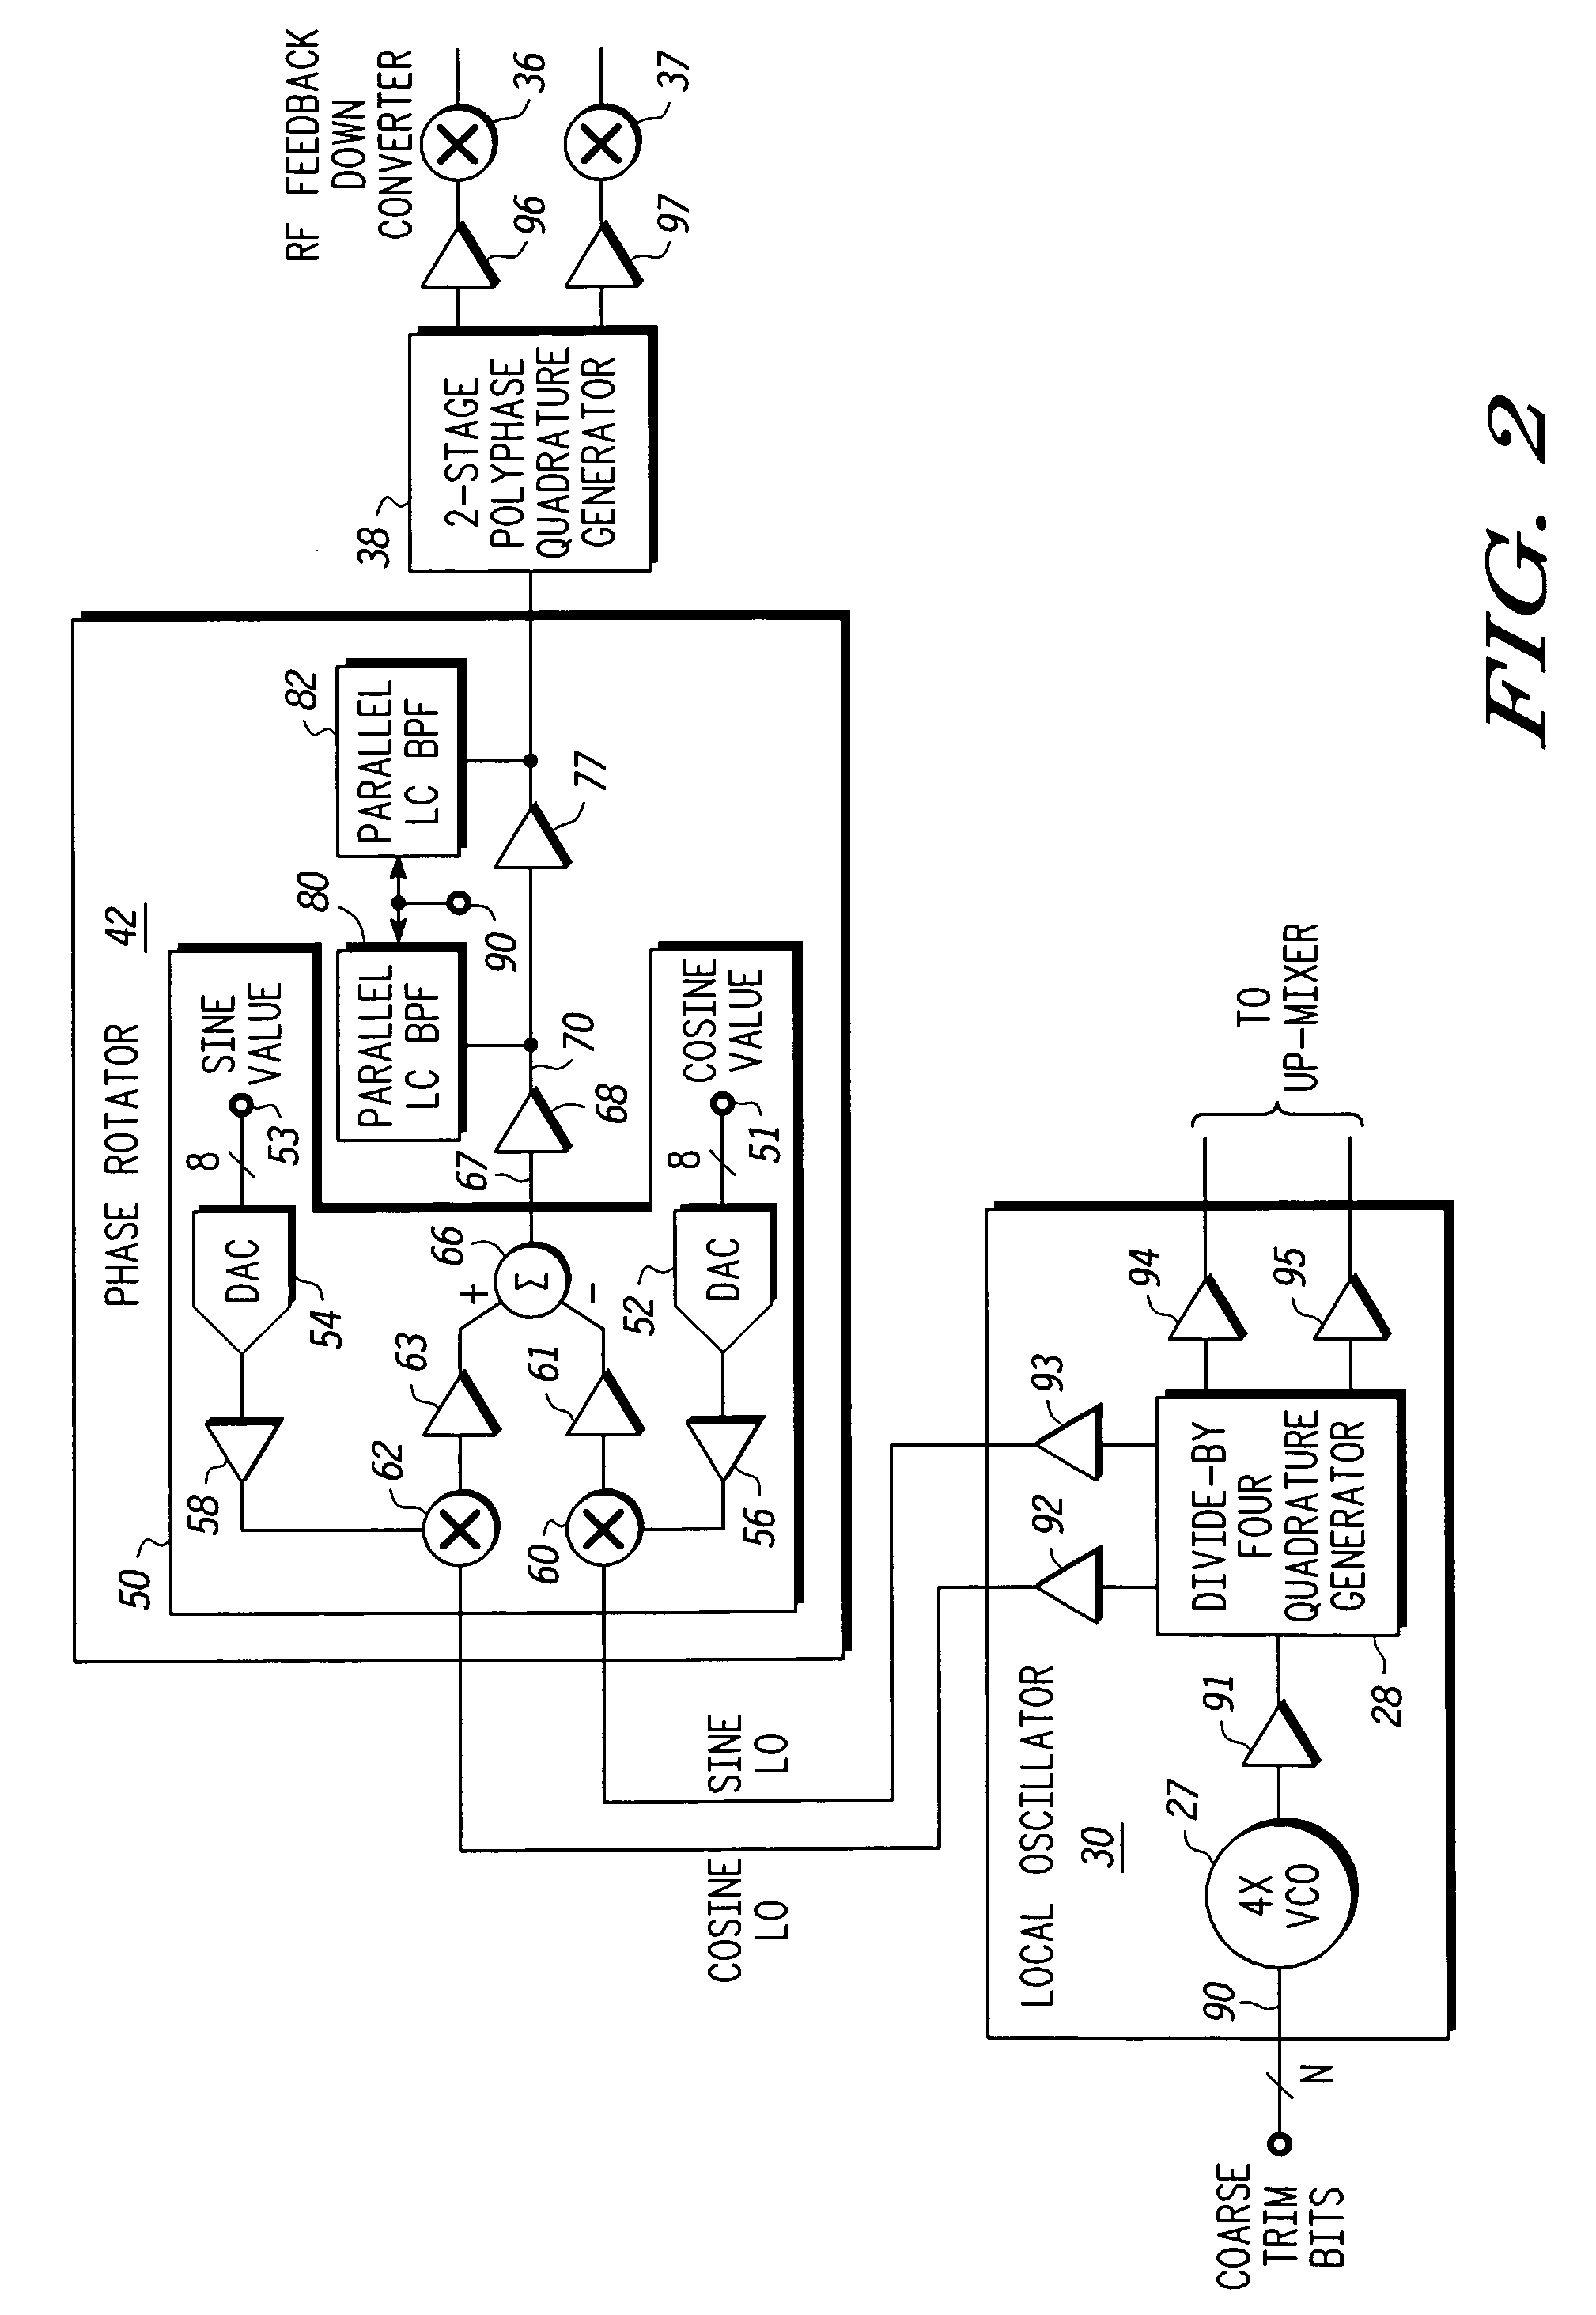 Center frequency control of an integrated phase rotator band-pass filter using VCO coarse trim bits